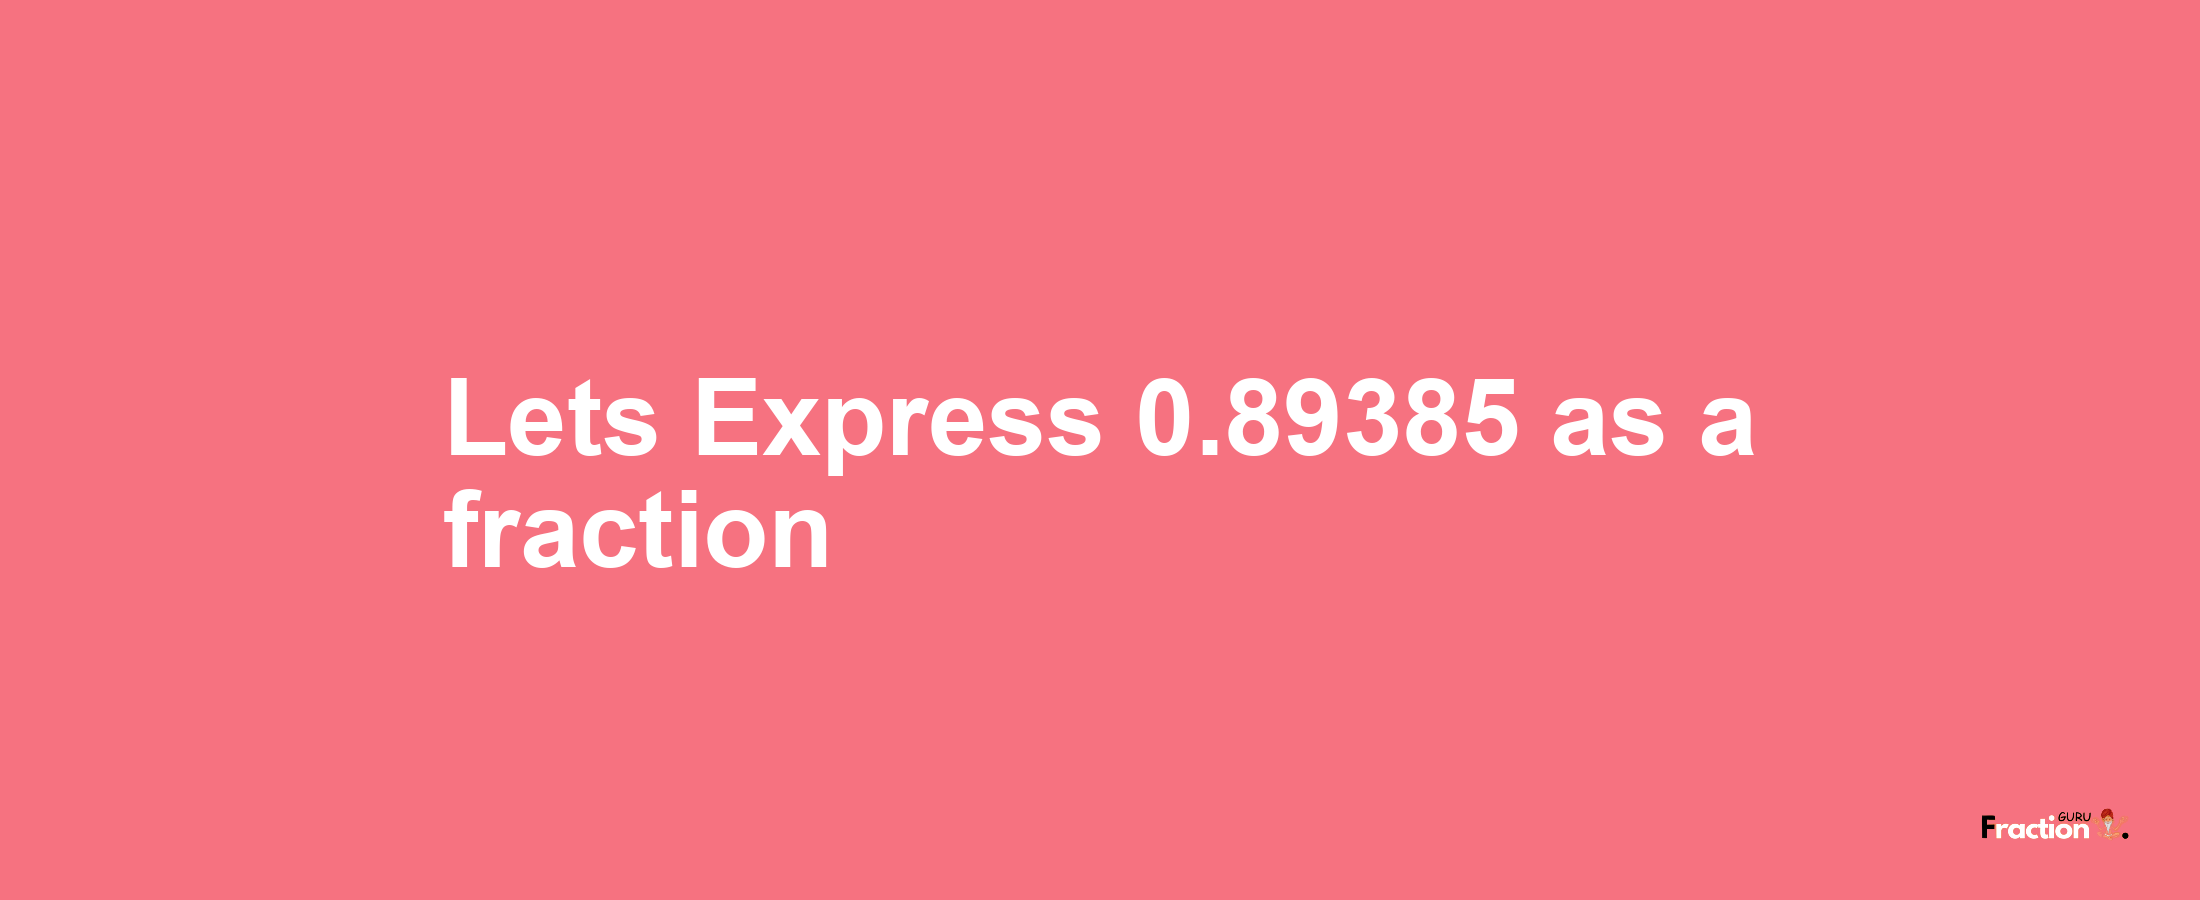 Lets Express 0.89385 as afraction